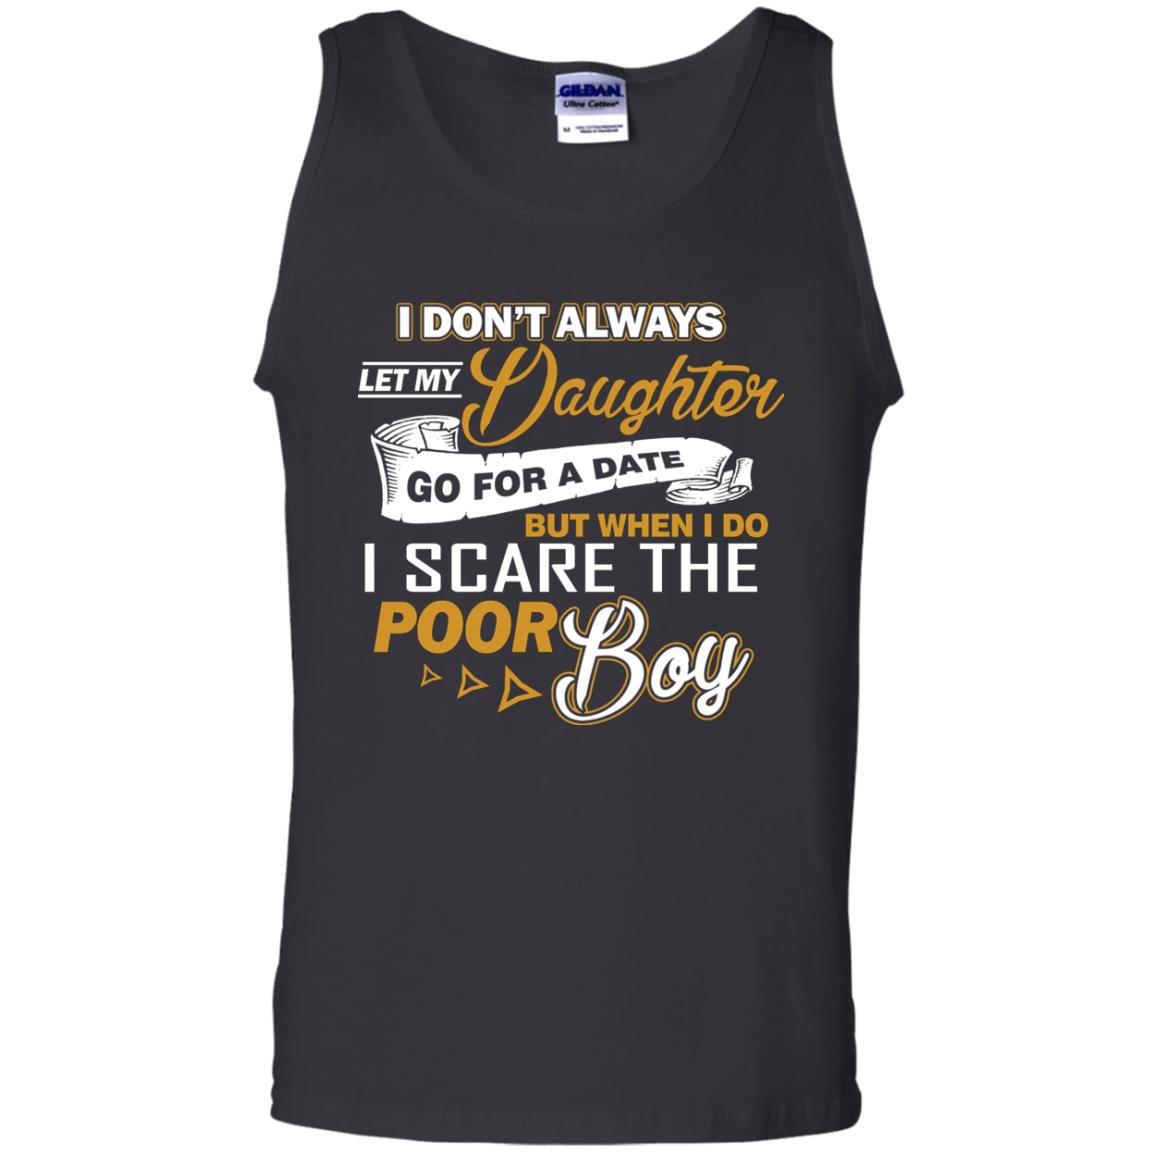 I Don’t Always Let My Daughter Go For A Date, But When I Do I Scare The Poor BoyG220 Gildan 100% Cotton Tank Top